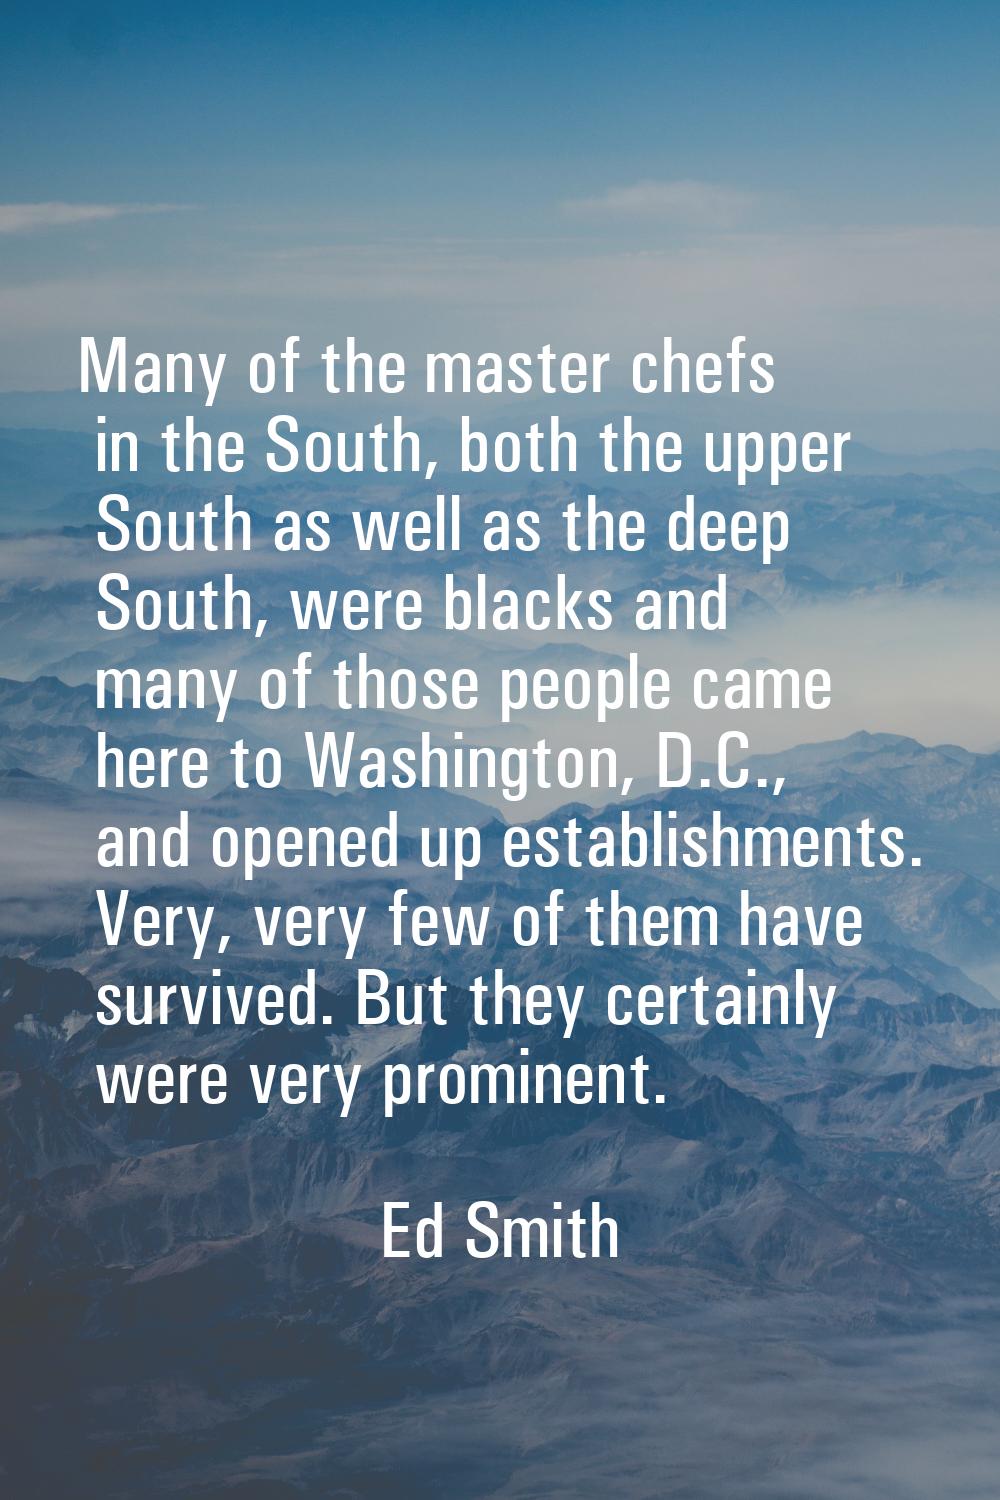 Many of the master chefs in the South, both the upper South as well as the deep South, were blacks 